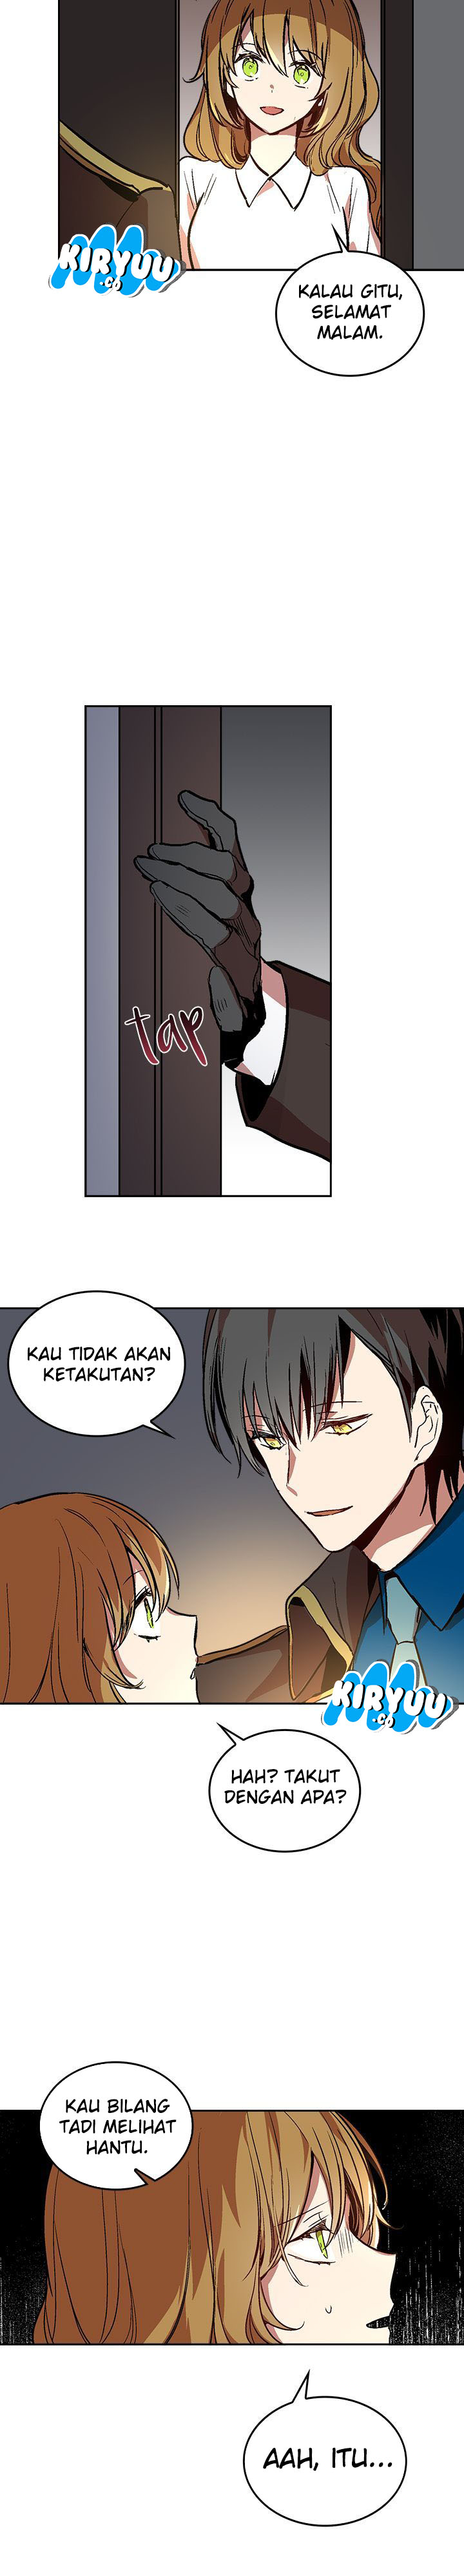 The Reason Why Raeliana Ended up at the Duke’s Mansion Chapter 46